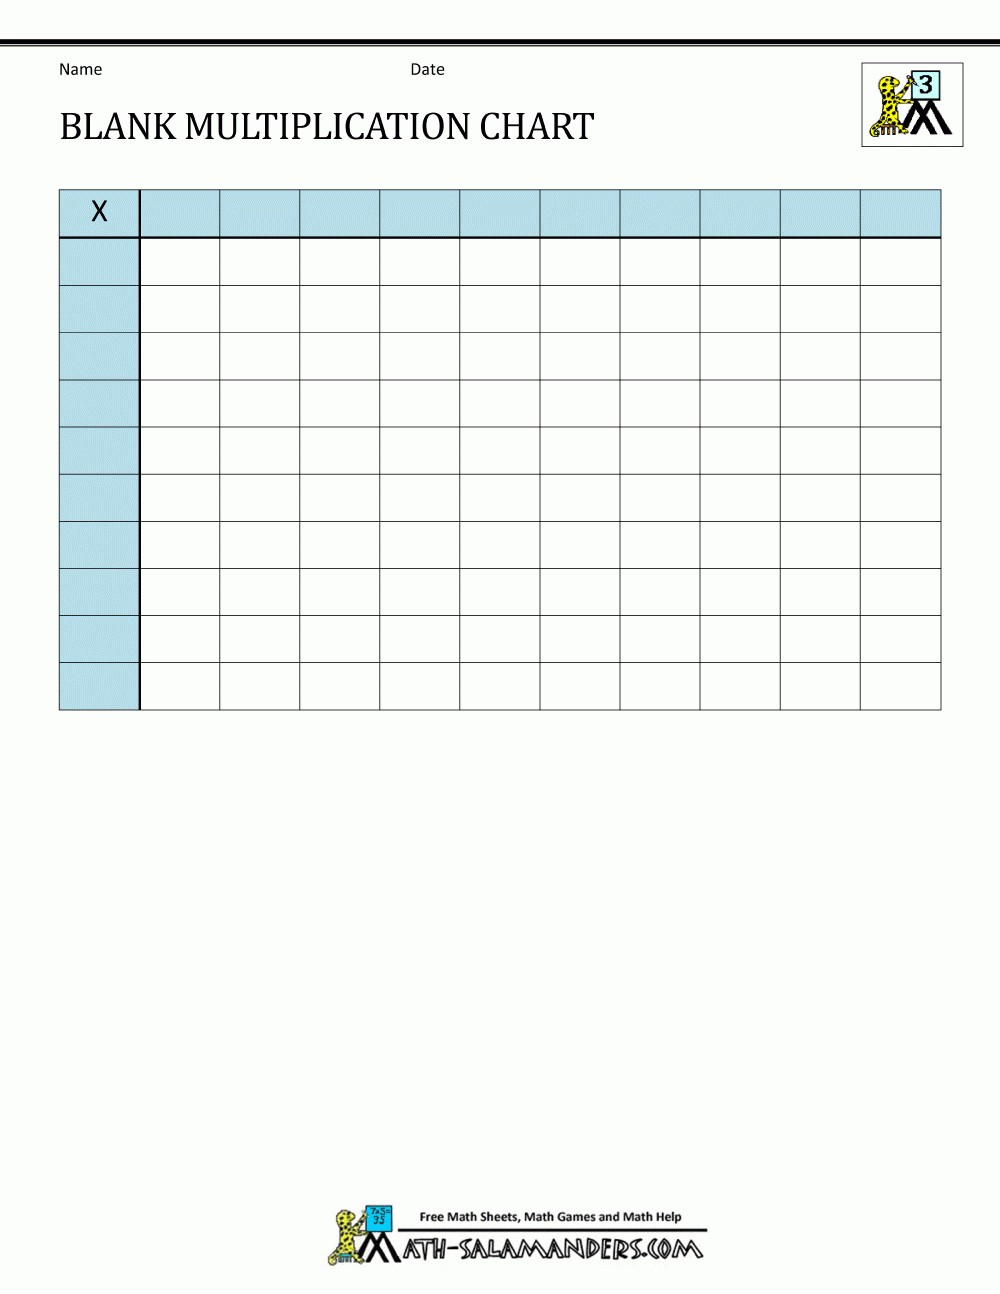 Blank Multiplication Chart Up To 10X10 for Easy Printable Multiplication Chart